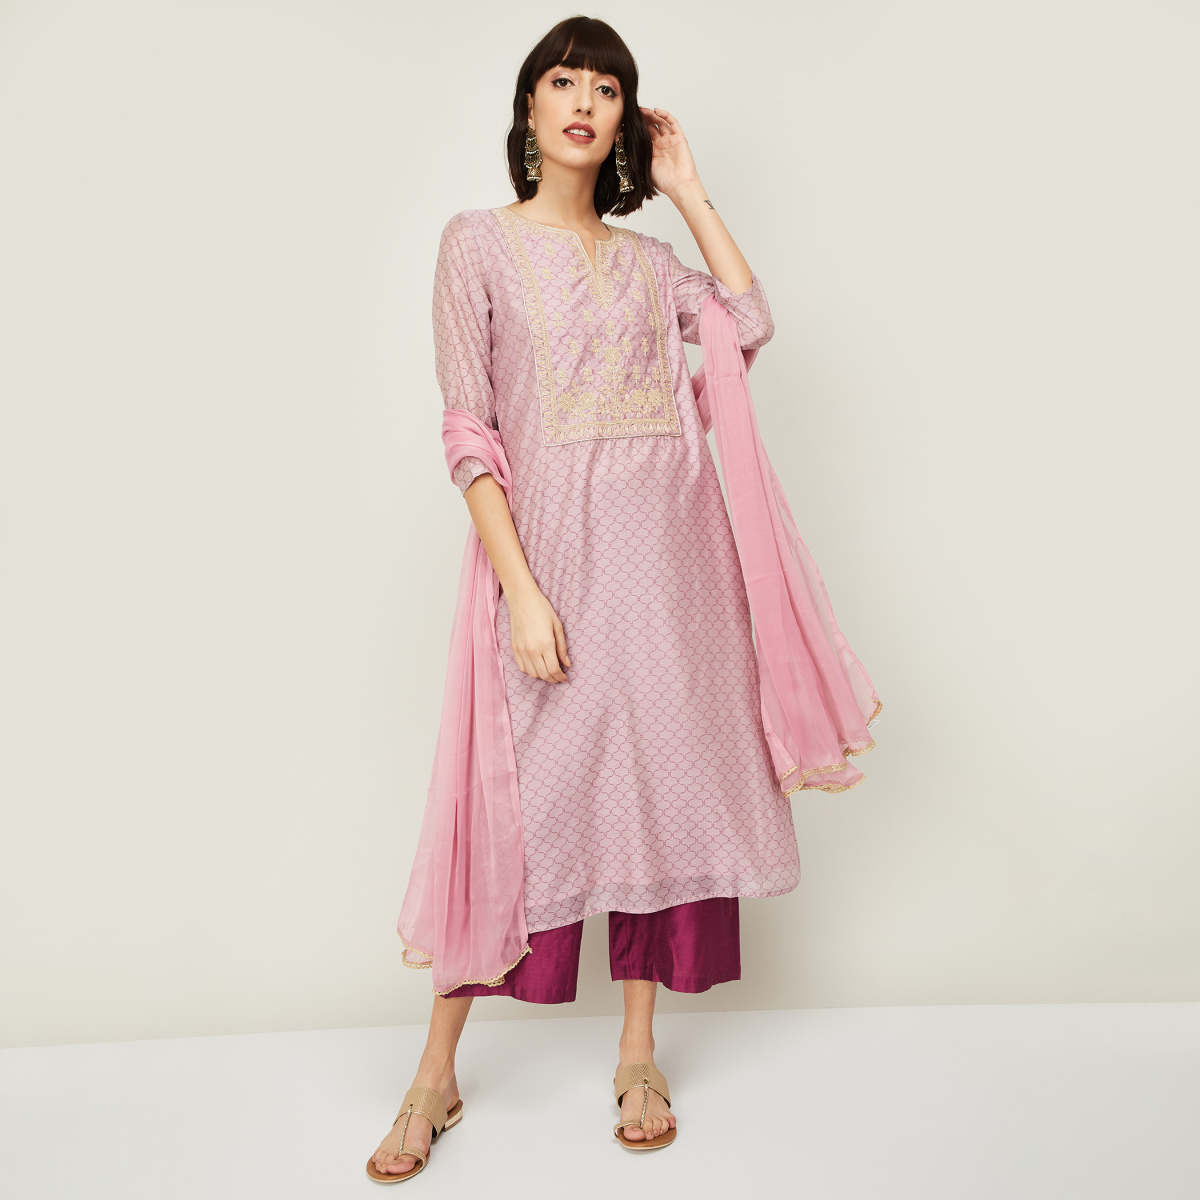 Lifestyle Stores  Avail Rs250 off on Melange Kurtas above Rs699 Update  your wardrobe with contemporary ethnic wear Offer only at Melange GT  World Mall from 12  14 May TC Apply  Facebook